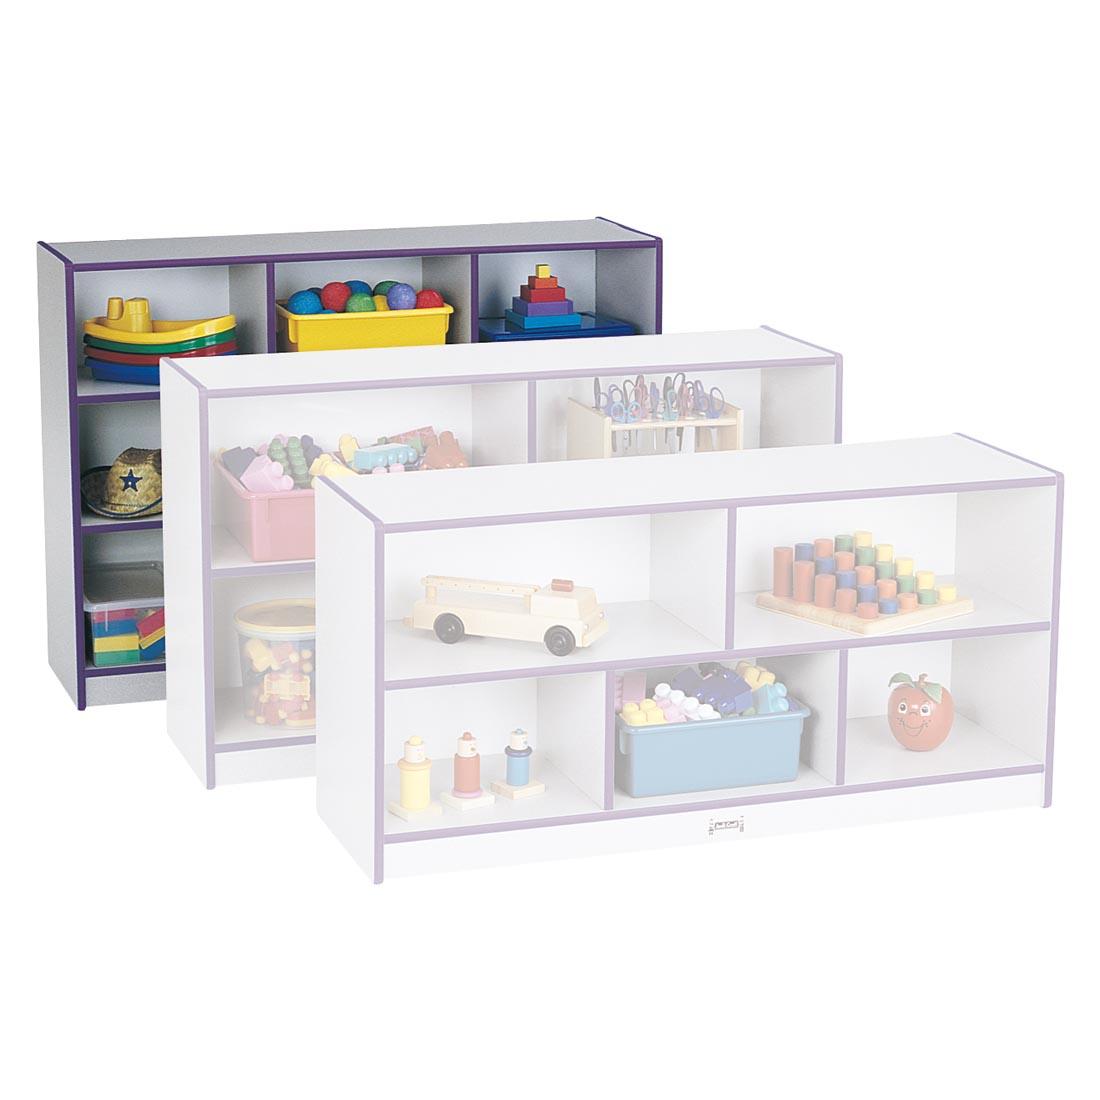 Rainbow Accents Purple Edge Single Mobile Storage Unit Super-Sized Height with two shelves in front of it to show scale